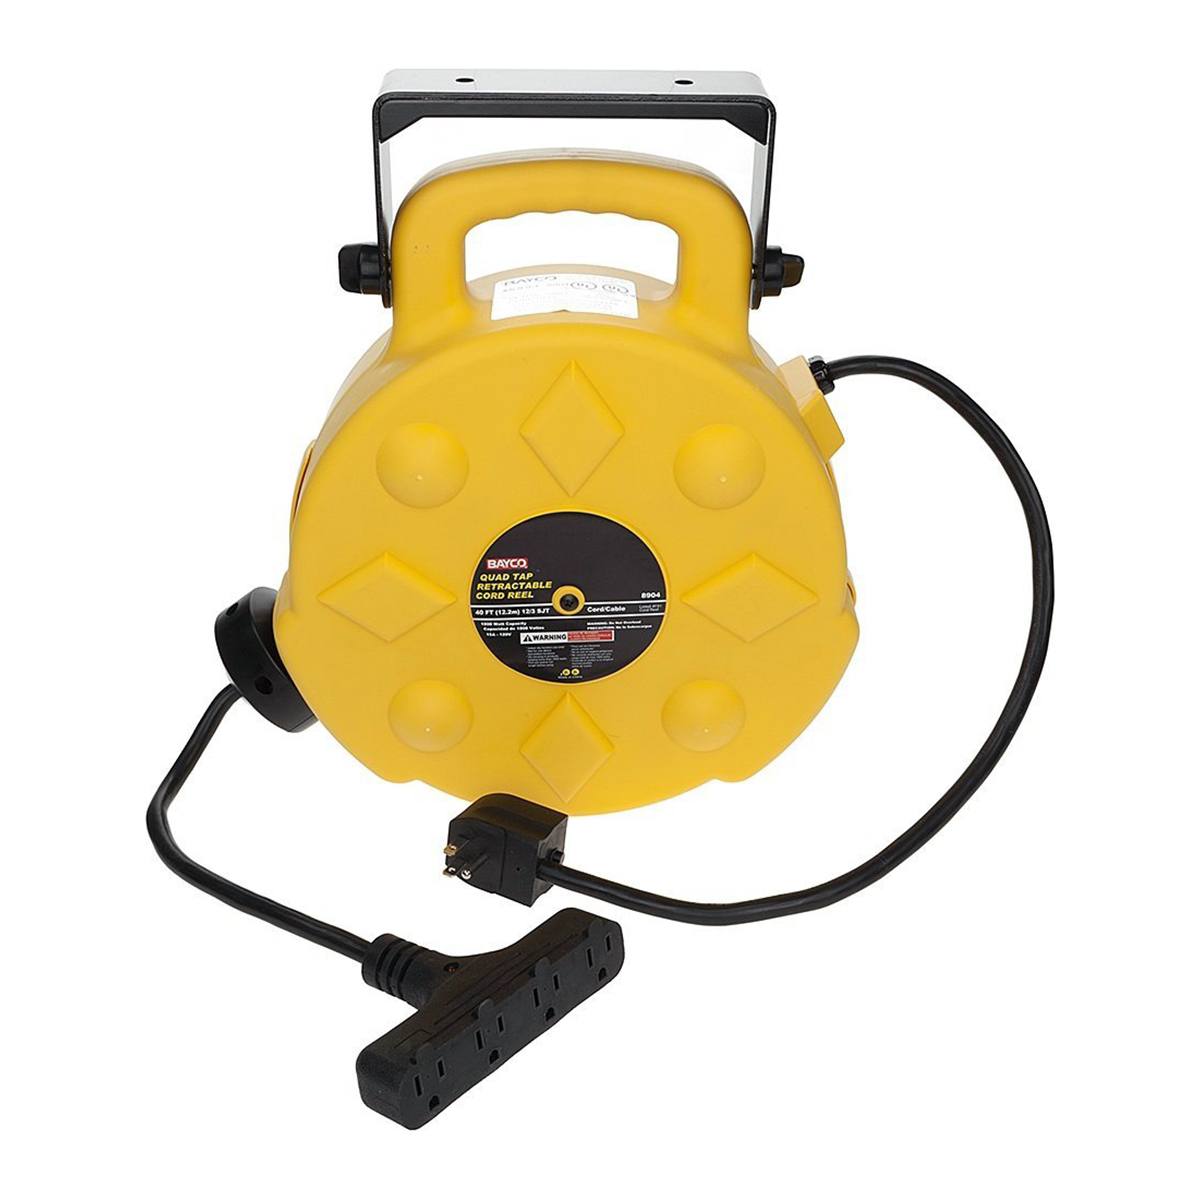 50 Ft Retractable Polymer Cord Reel w/ 4 Outlets 15amp